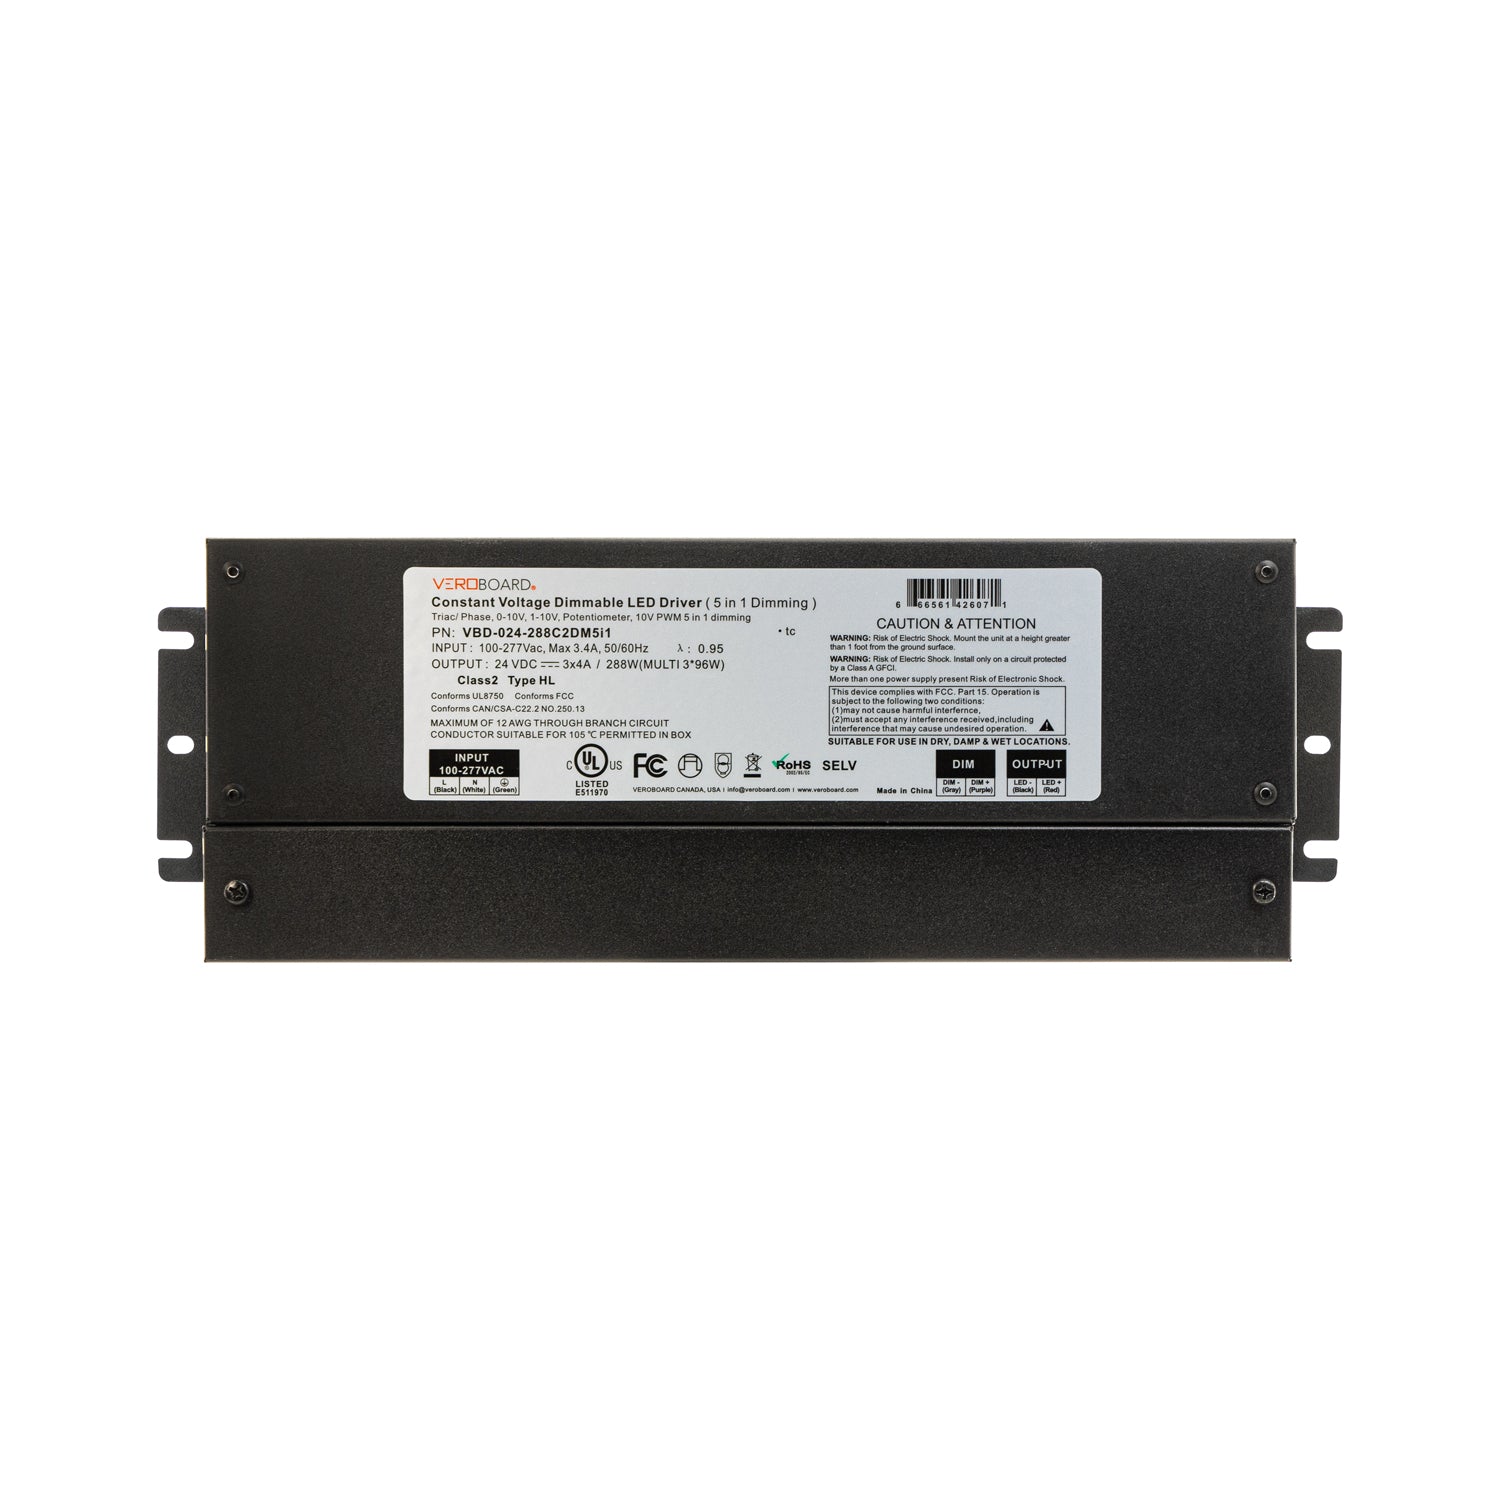 VBD-024-288C2DM5i1 Constant Voltage Dimmable Driver (5 in 1), Veroboard